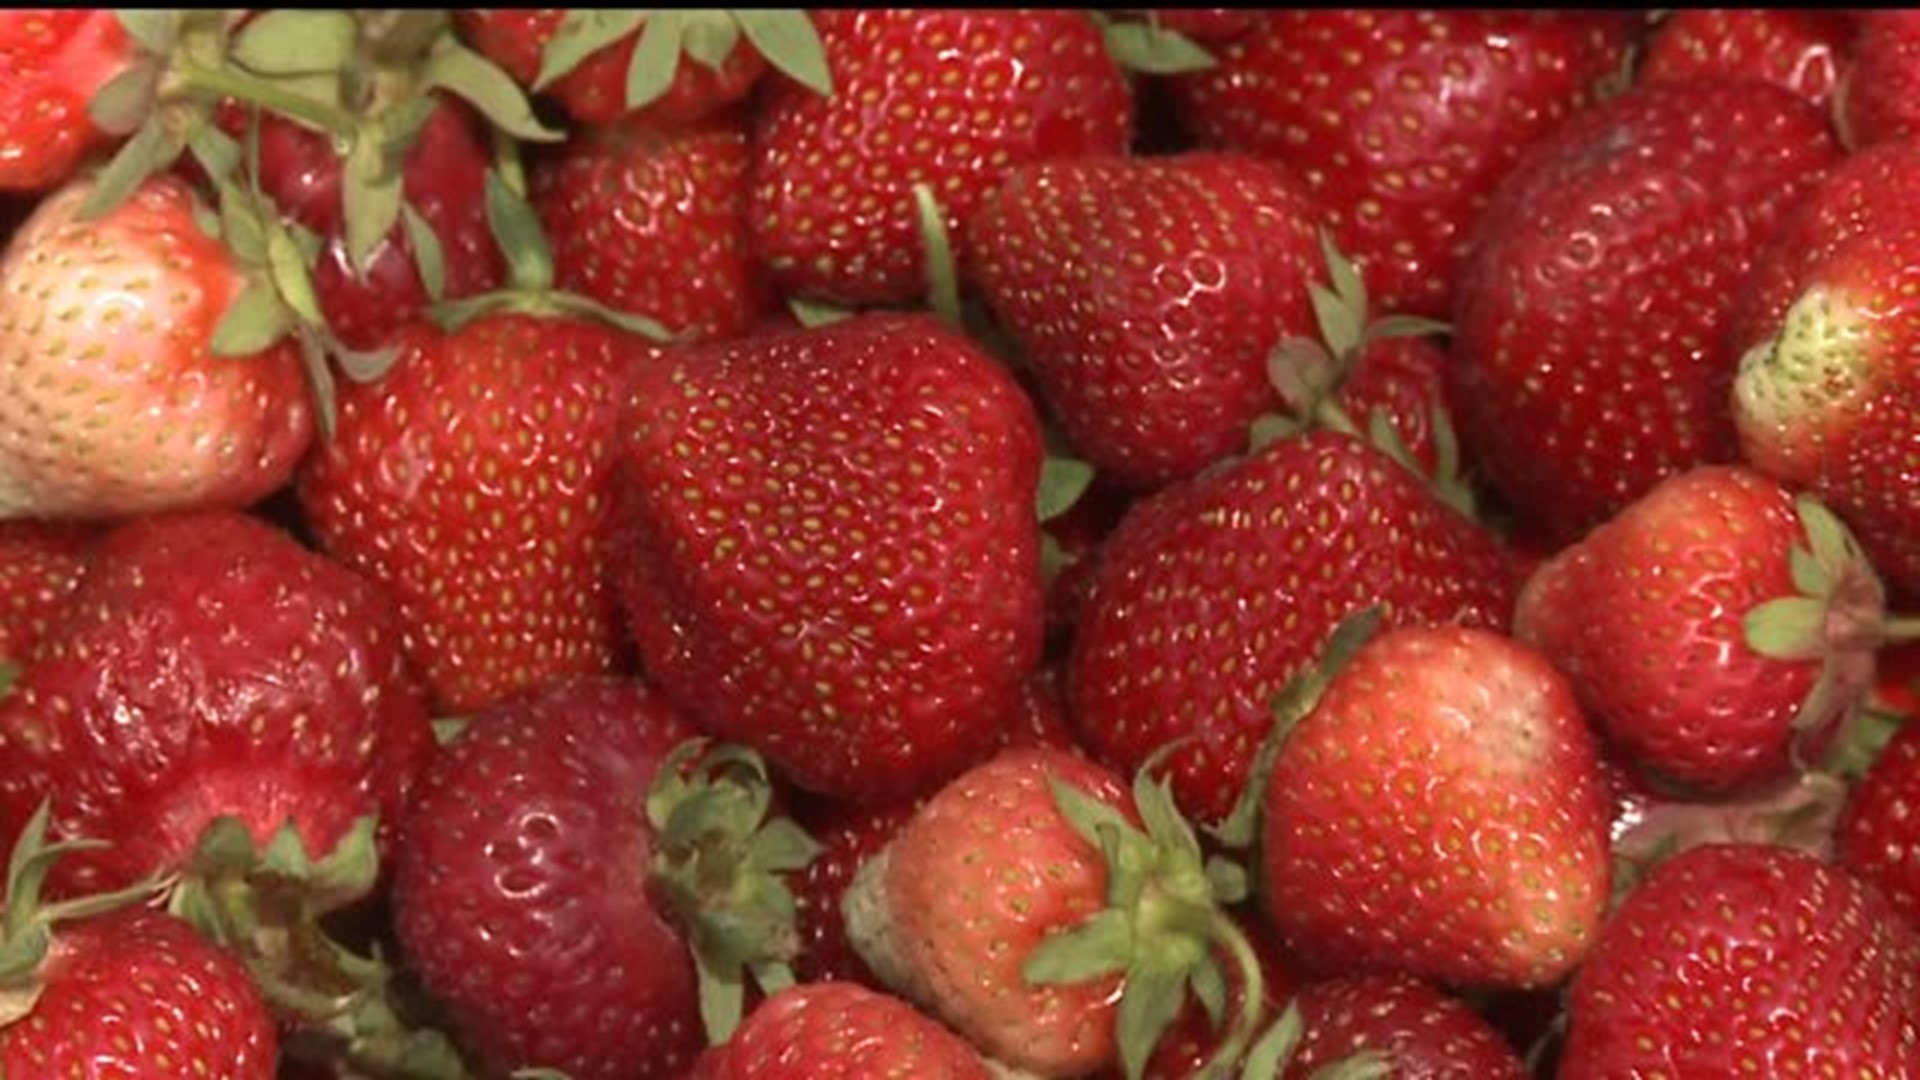 Strawberry picking season starts north of the Quad Cities